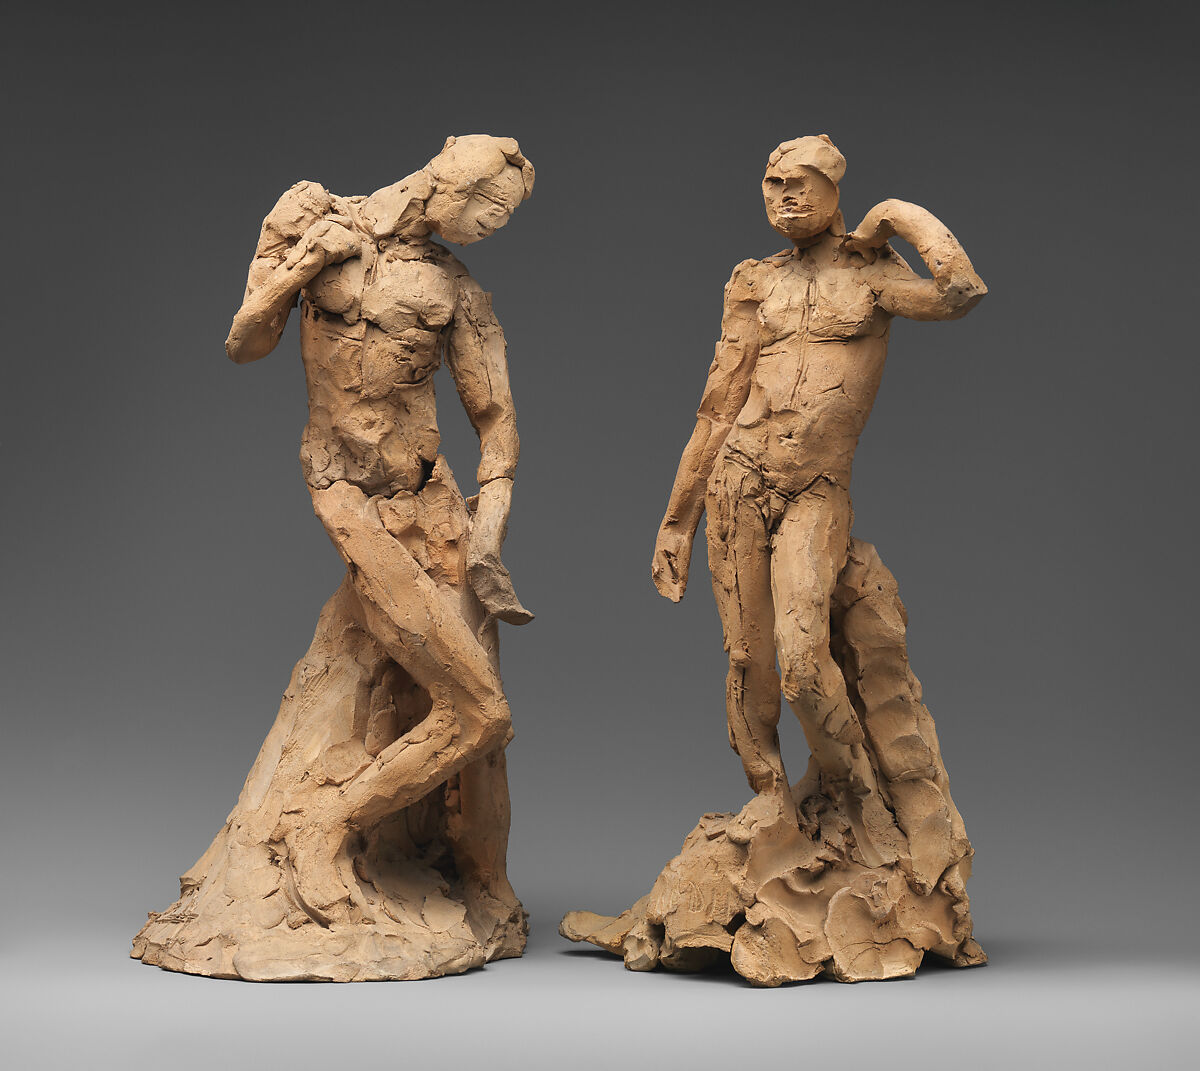 Pair of Standing Nude Male Figures Demonstrating the Principles of Contrapposto according to Michelangelo and Phidias